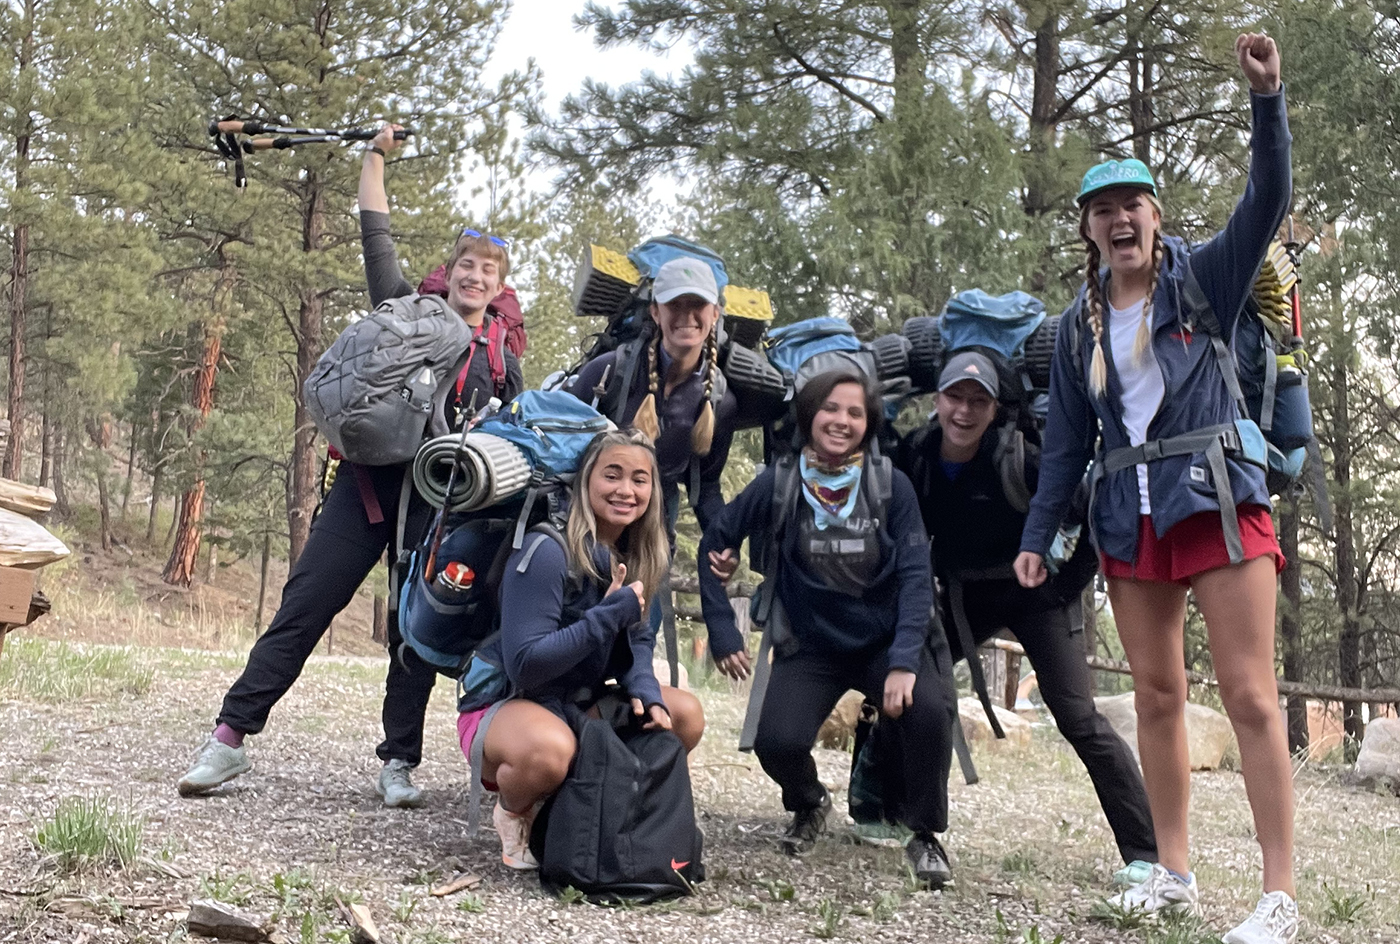 SMU-in-Taos students gathered wearing their backpacks with camping and hiking gear.